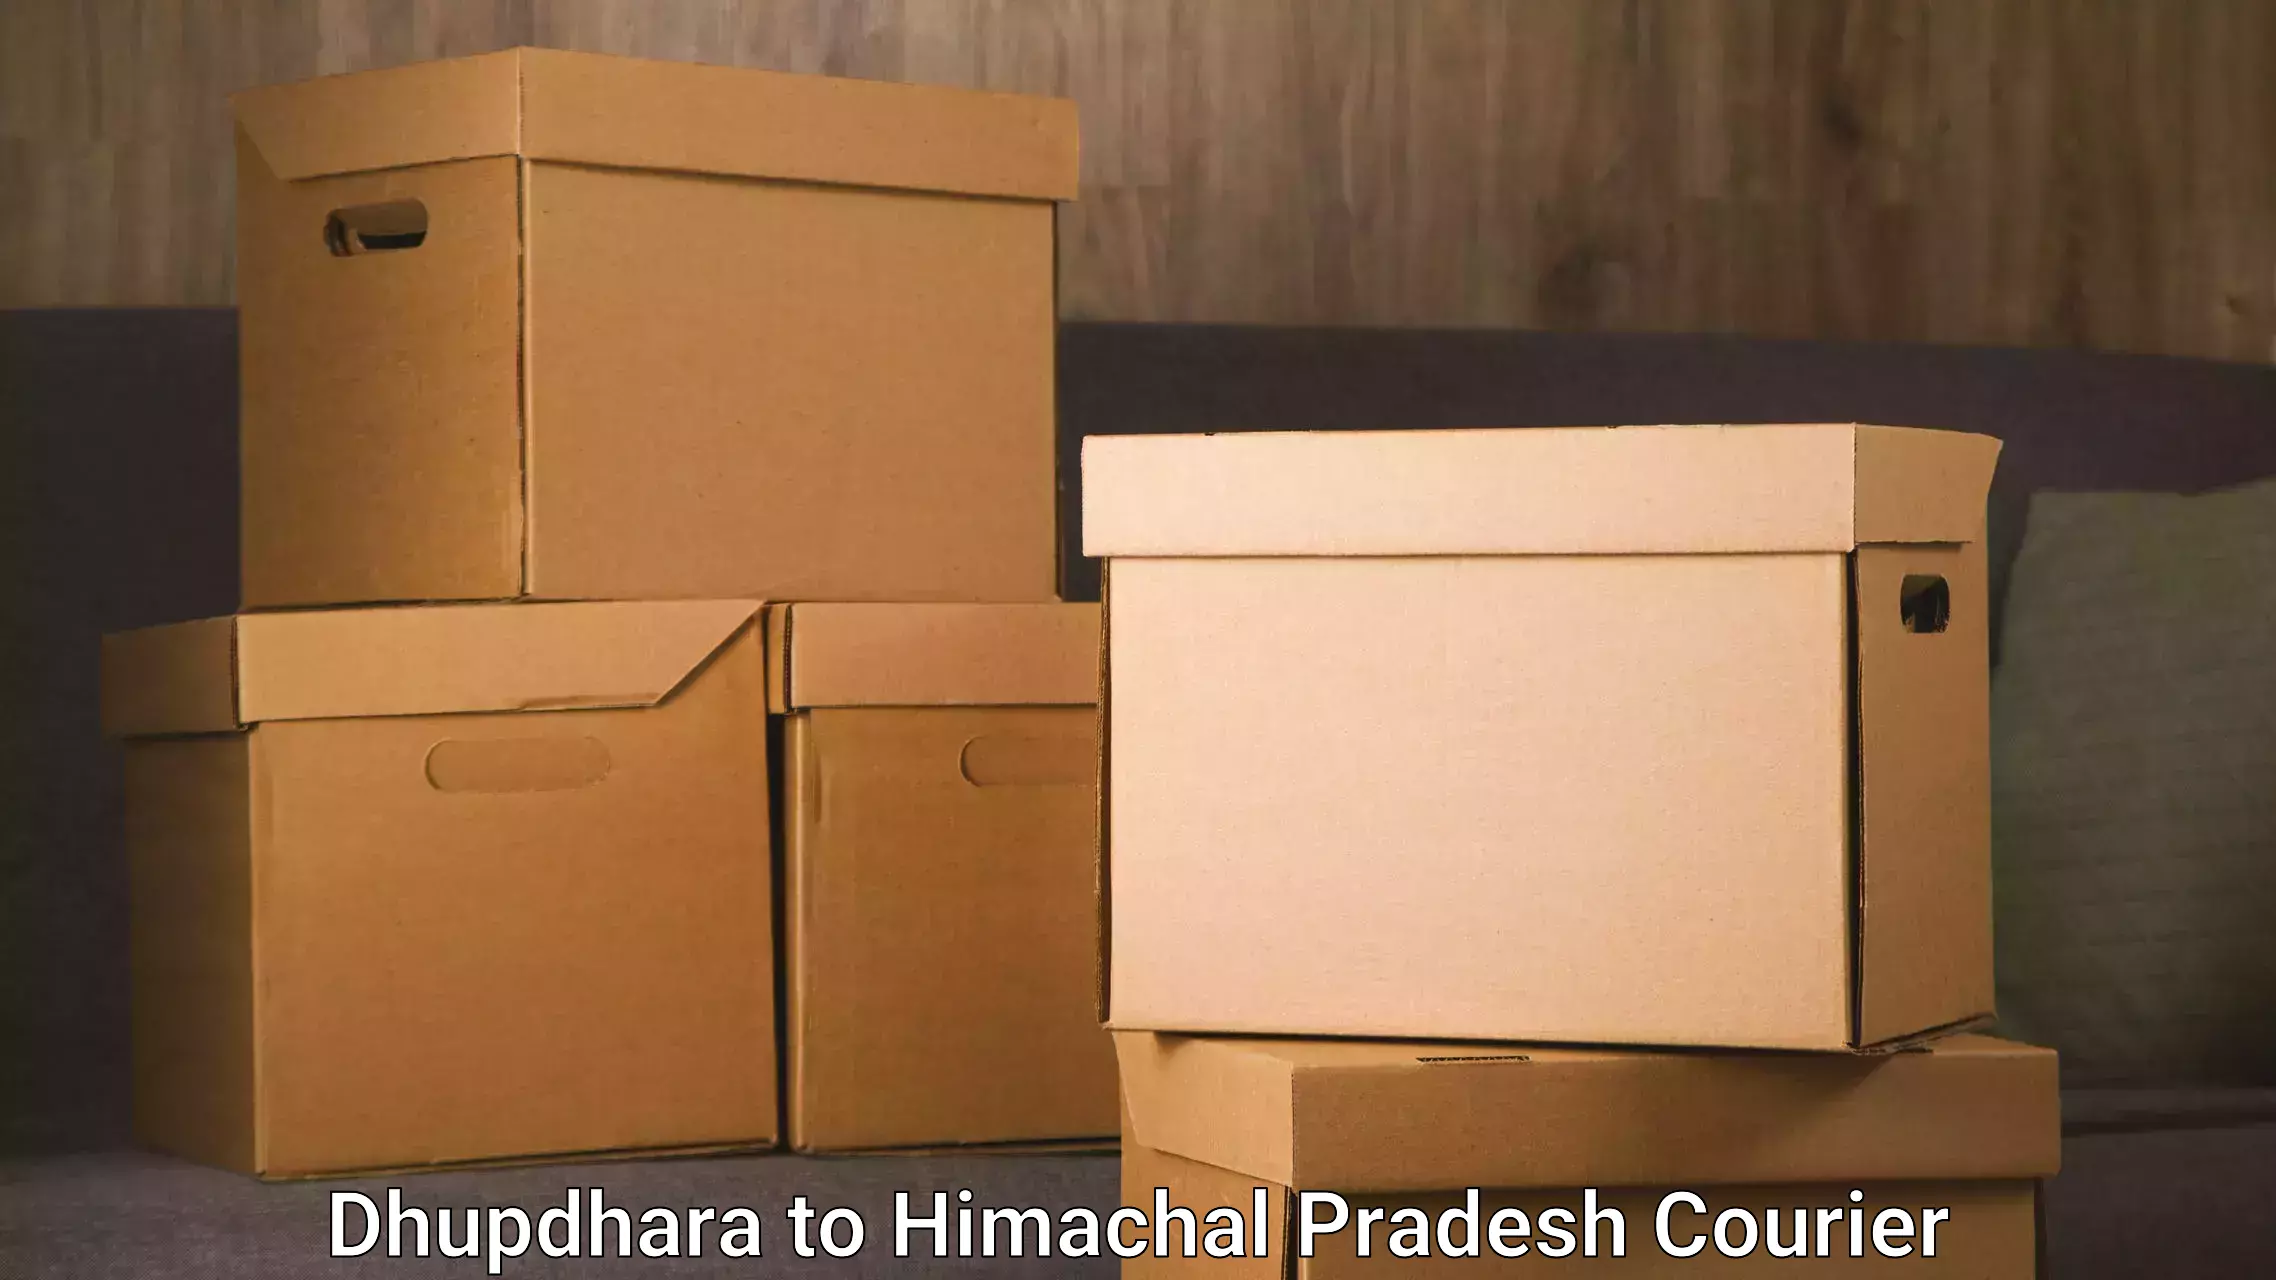 Courier service comparison Dhupdhara to Waknaghat